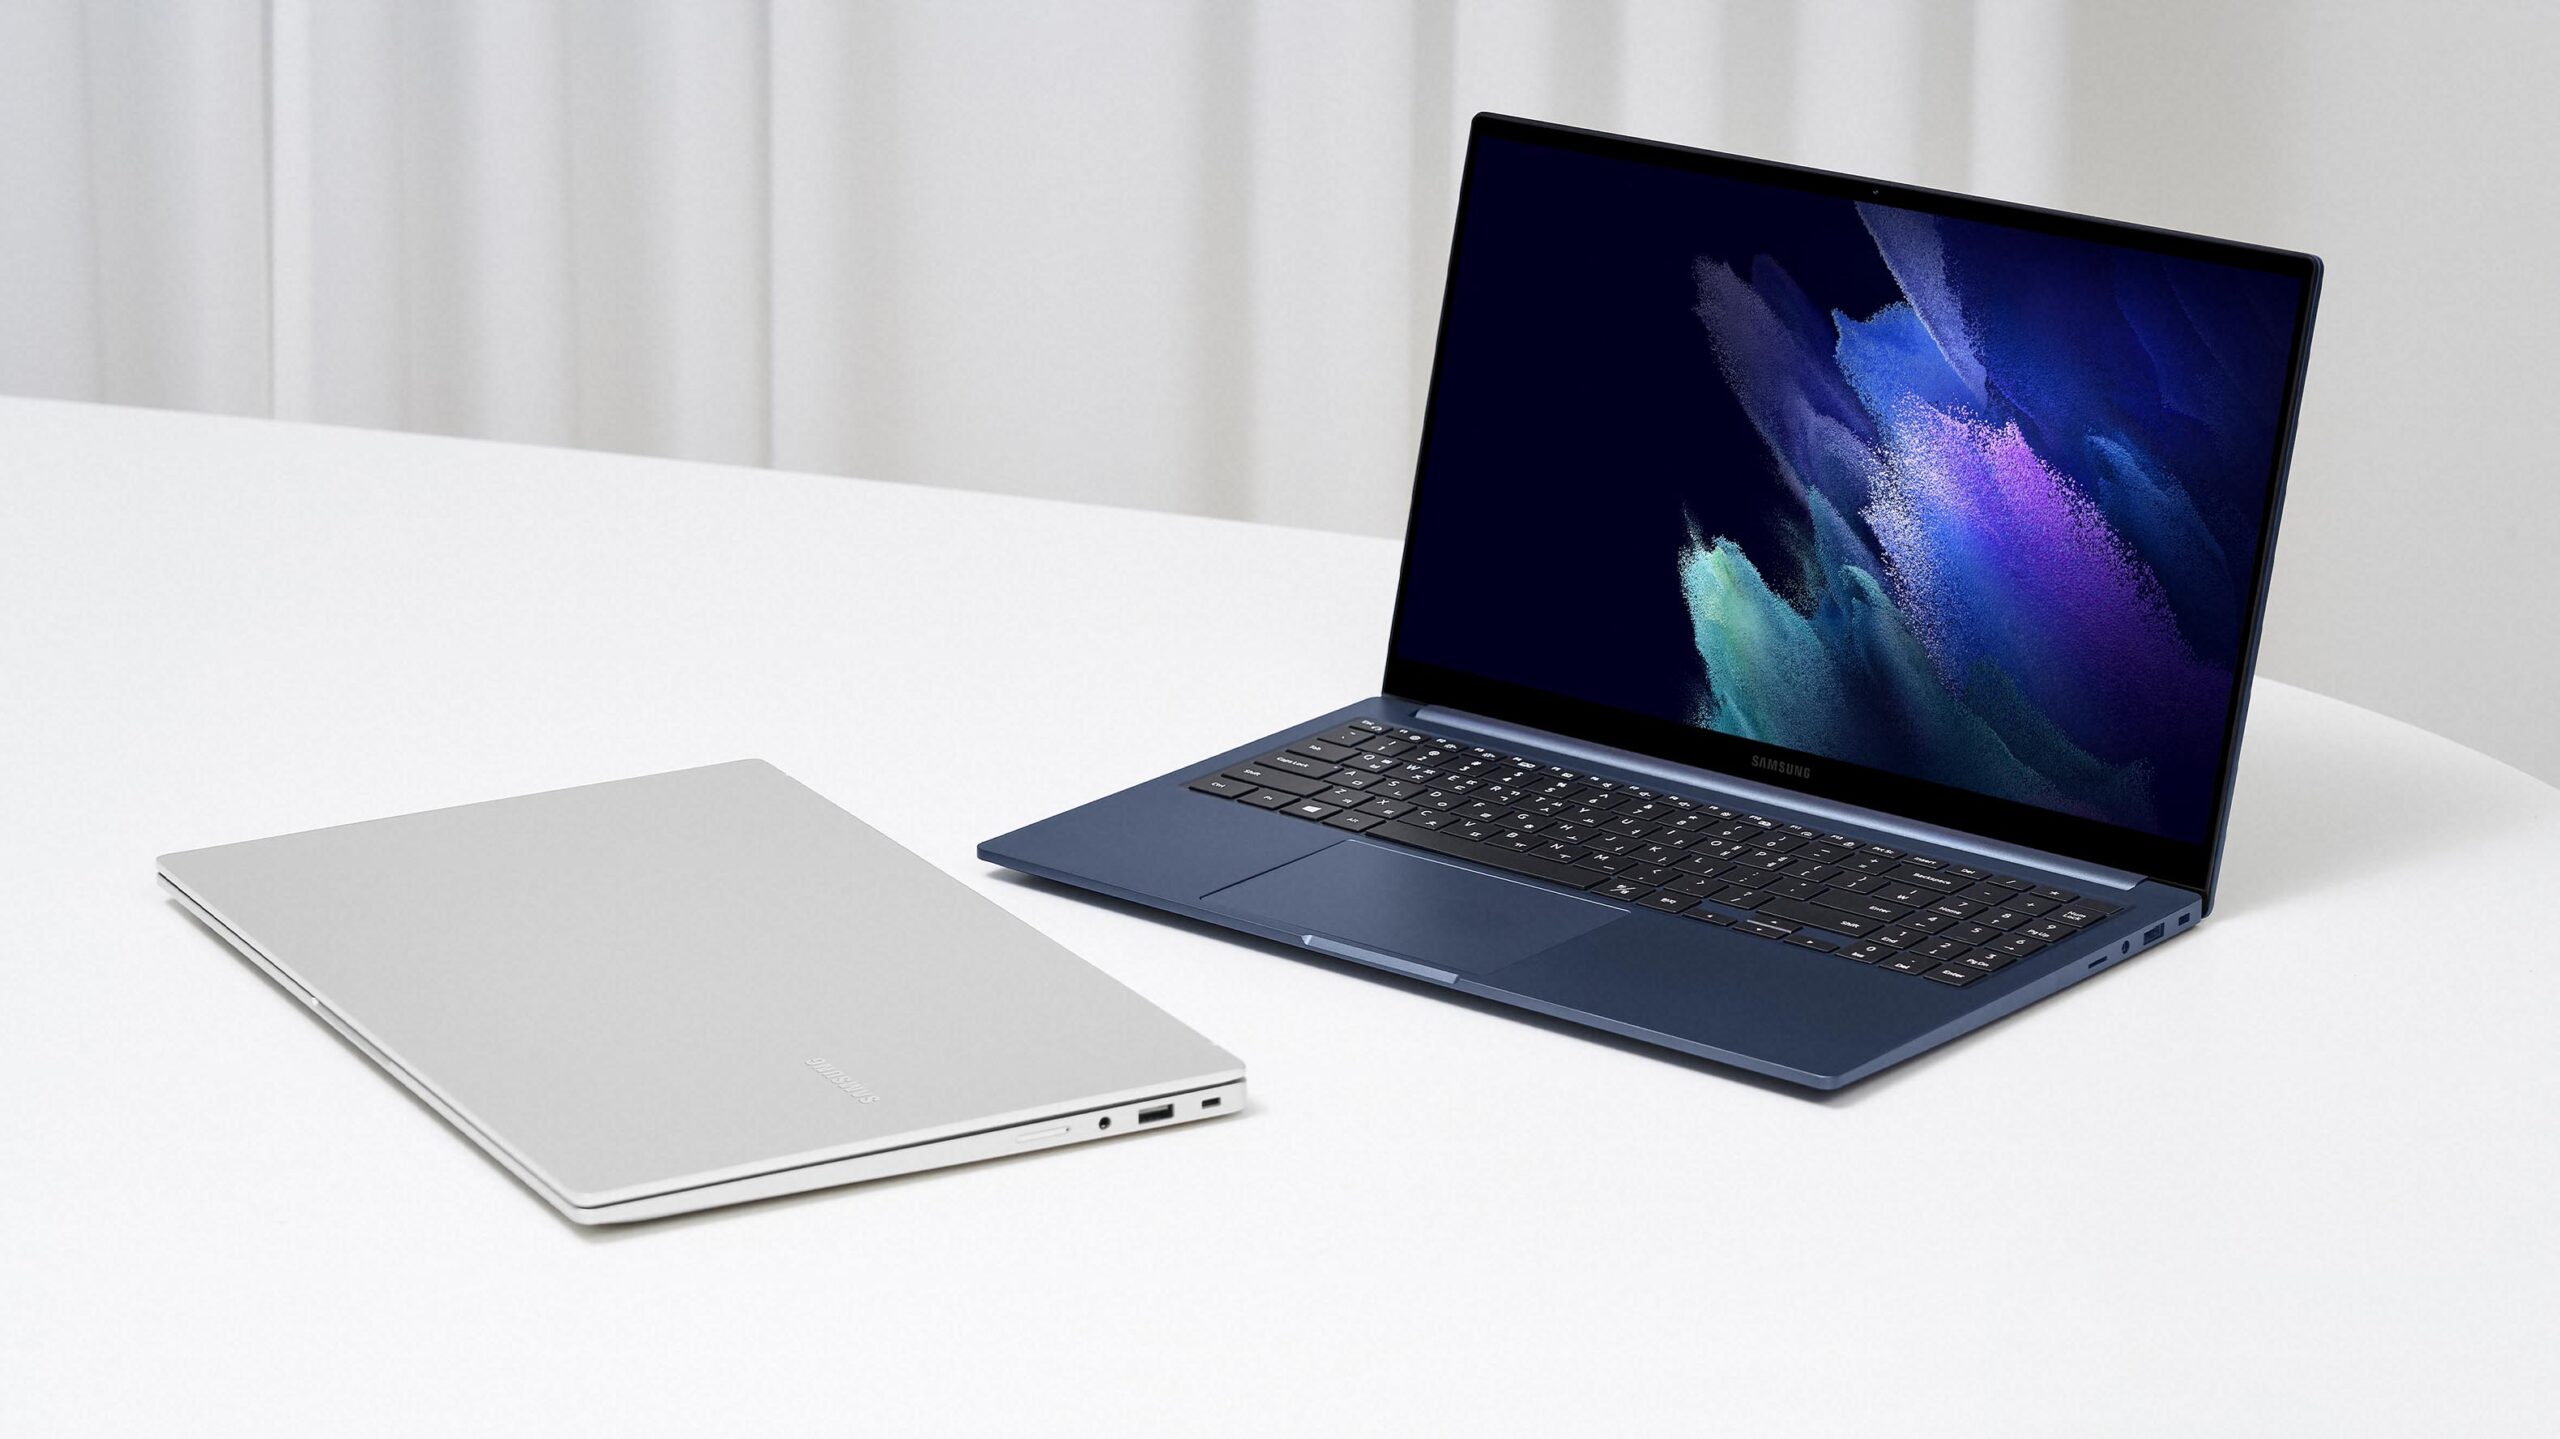 Samsung announces new Galaxy Book line with 11th Gen Intel processors